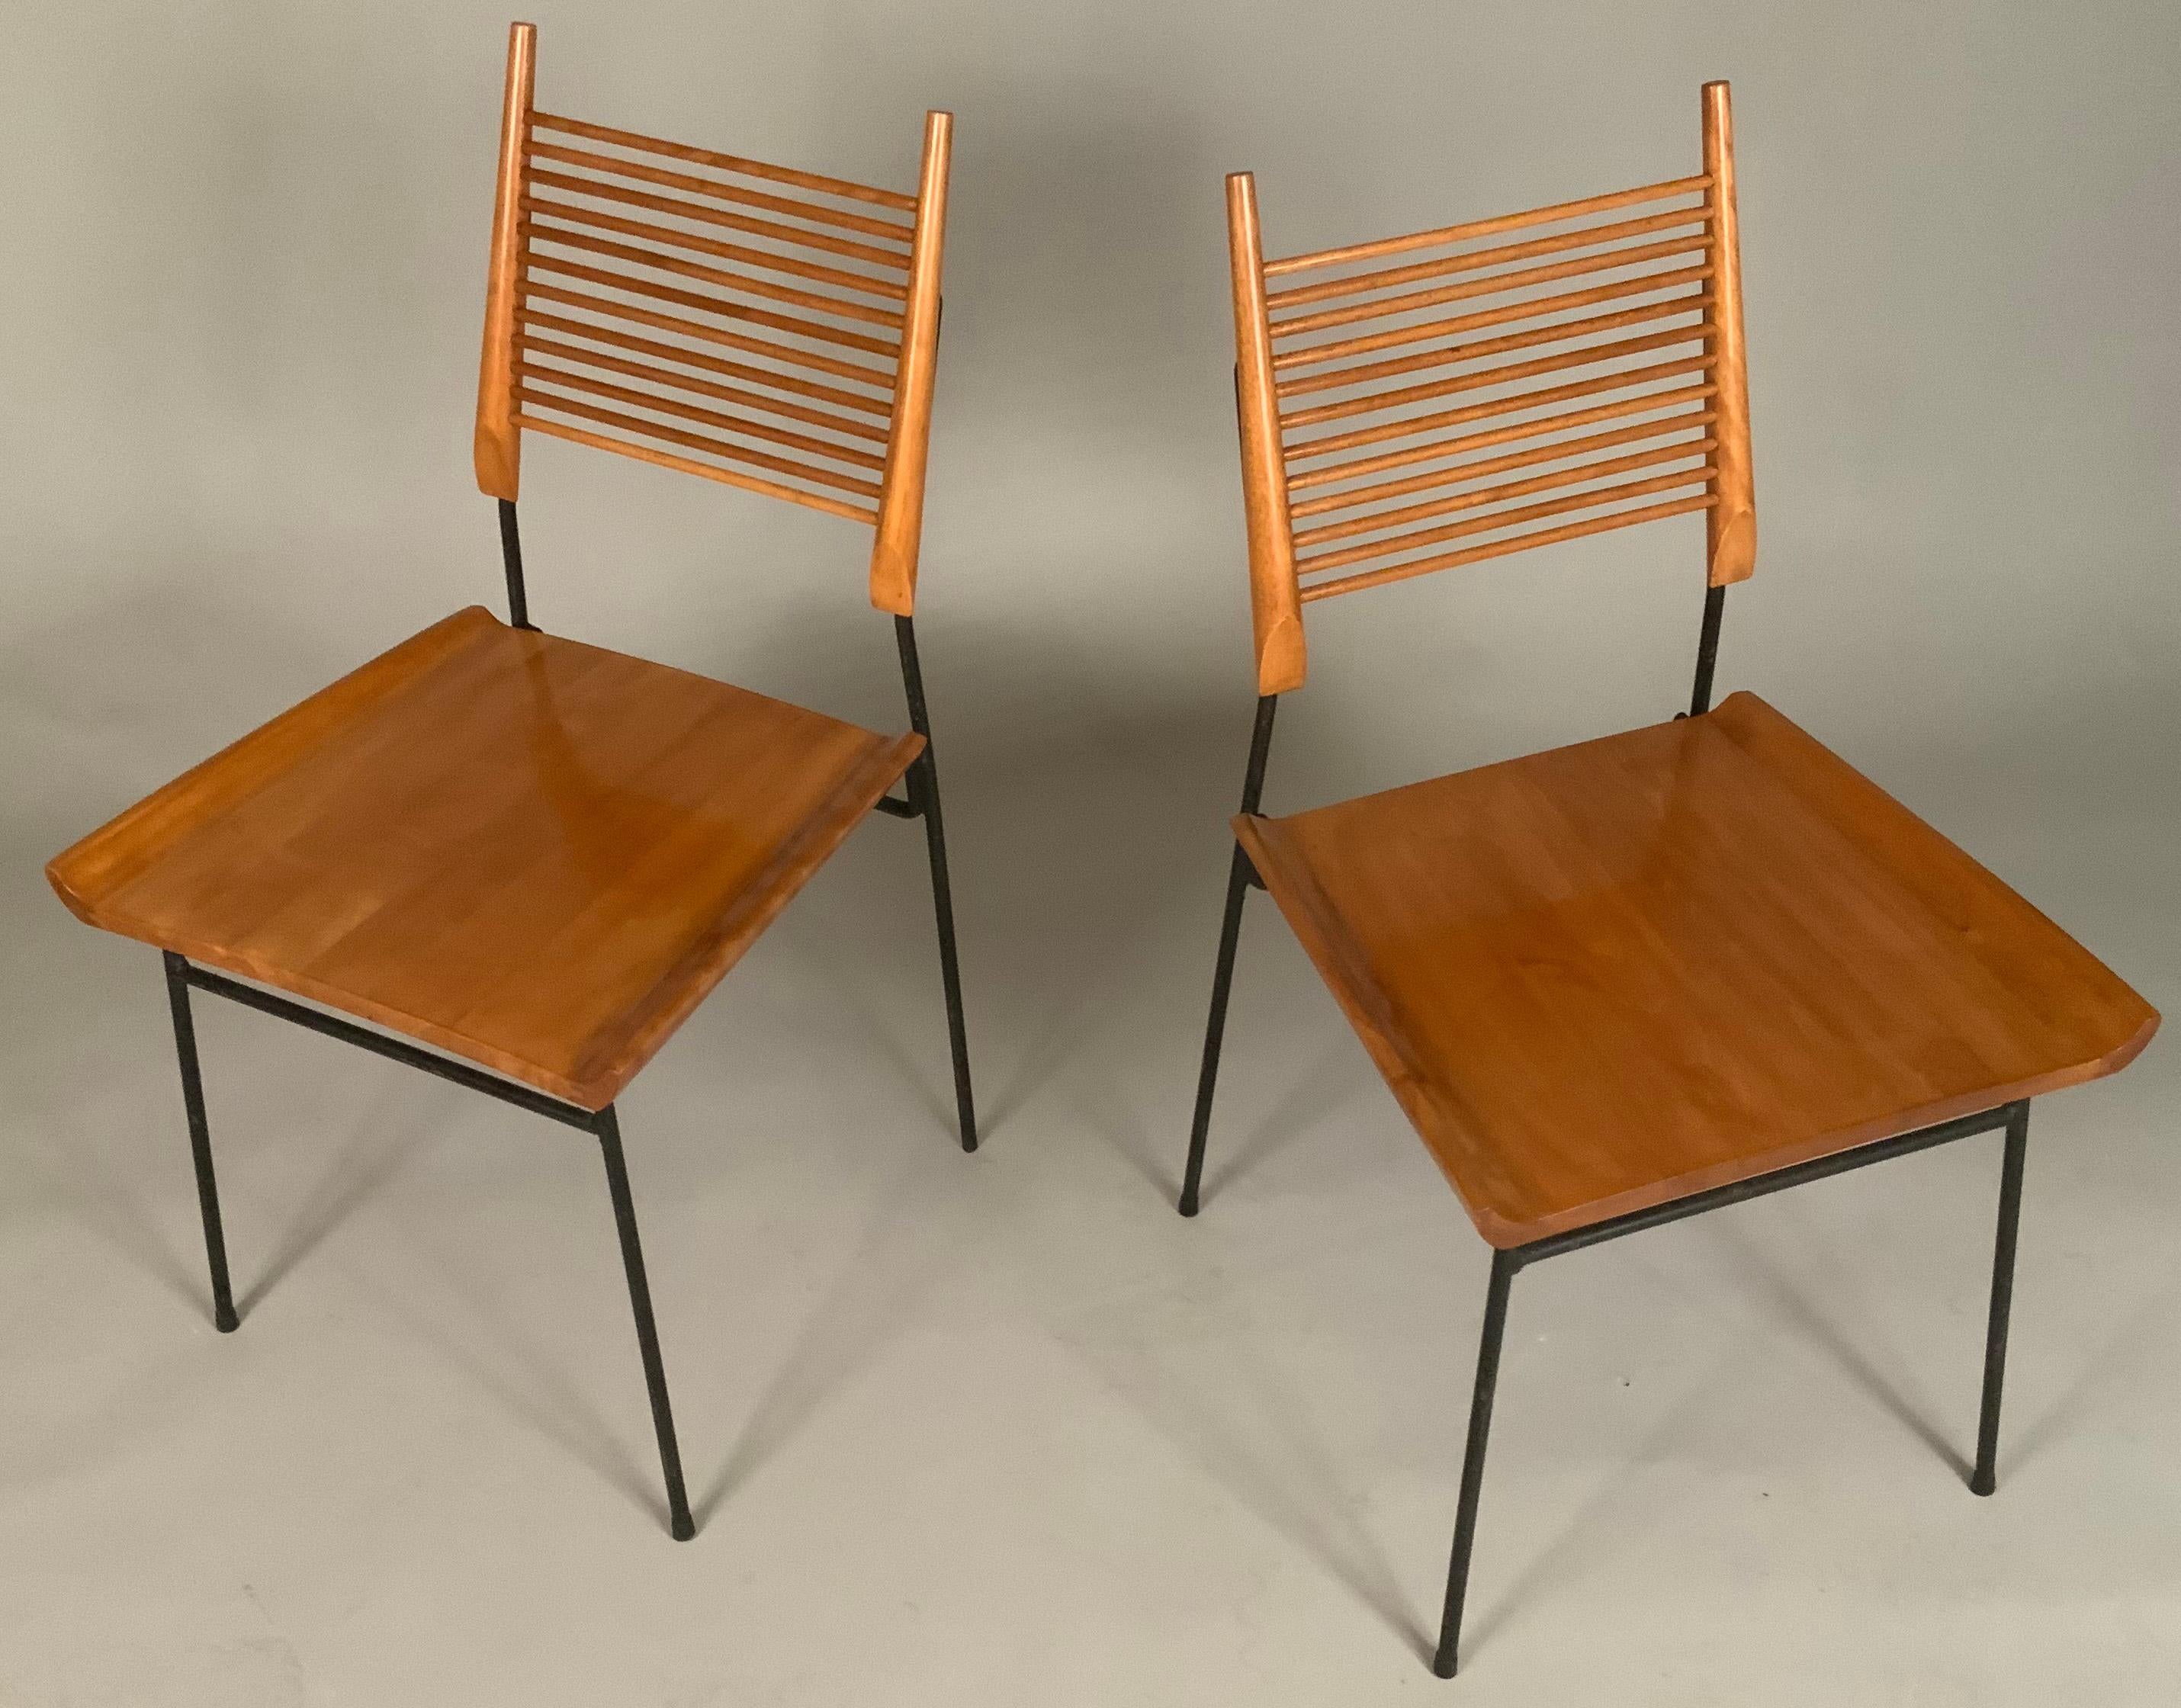 a rare pair of classic 1950's 'Shovel' chairs by Paul McCobb. one of his most sought after chairs, the shovel chair has a spare and elegant wrought iron frame, with scooped 'shovel' seats in solid maple, and solid maple ladder backs.
 